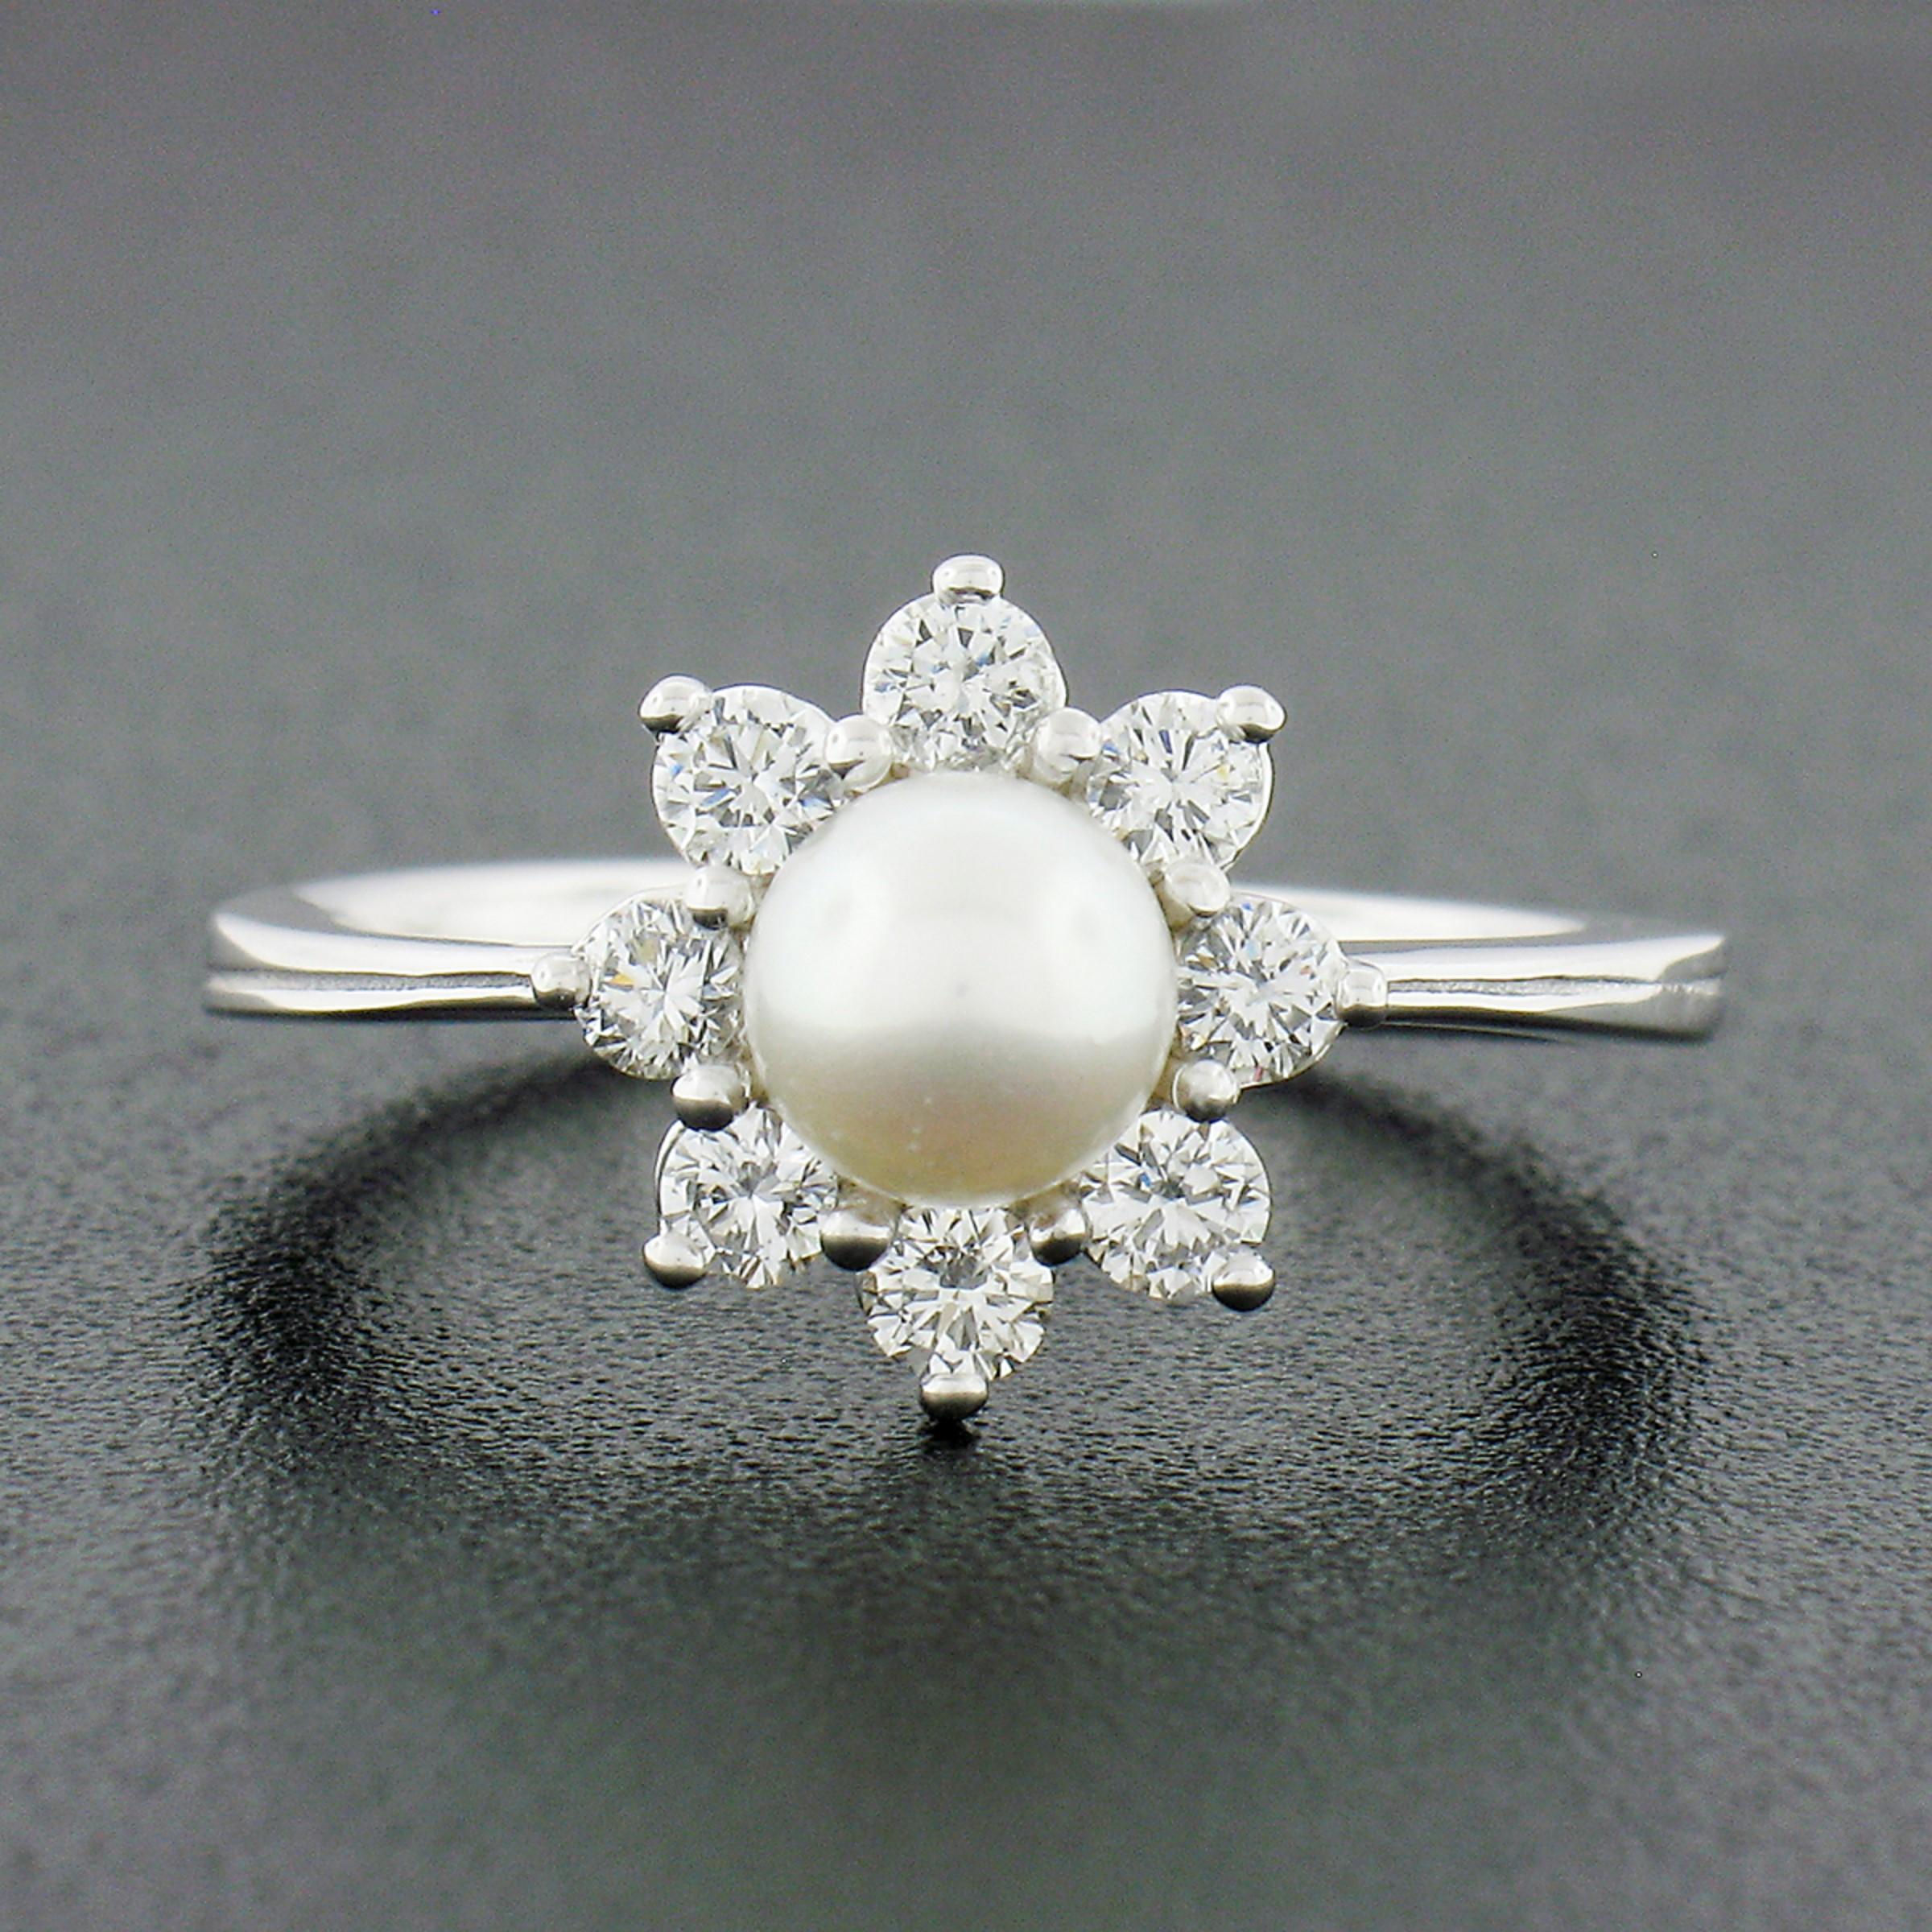 This classic pearl and diamond flower cluster ring is newly crafted in solid 18k white gold. It is neatly set at the center with a round cultured pearl that shows a nice white color with amazing luster. The pearl is further surround and accented by